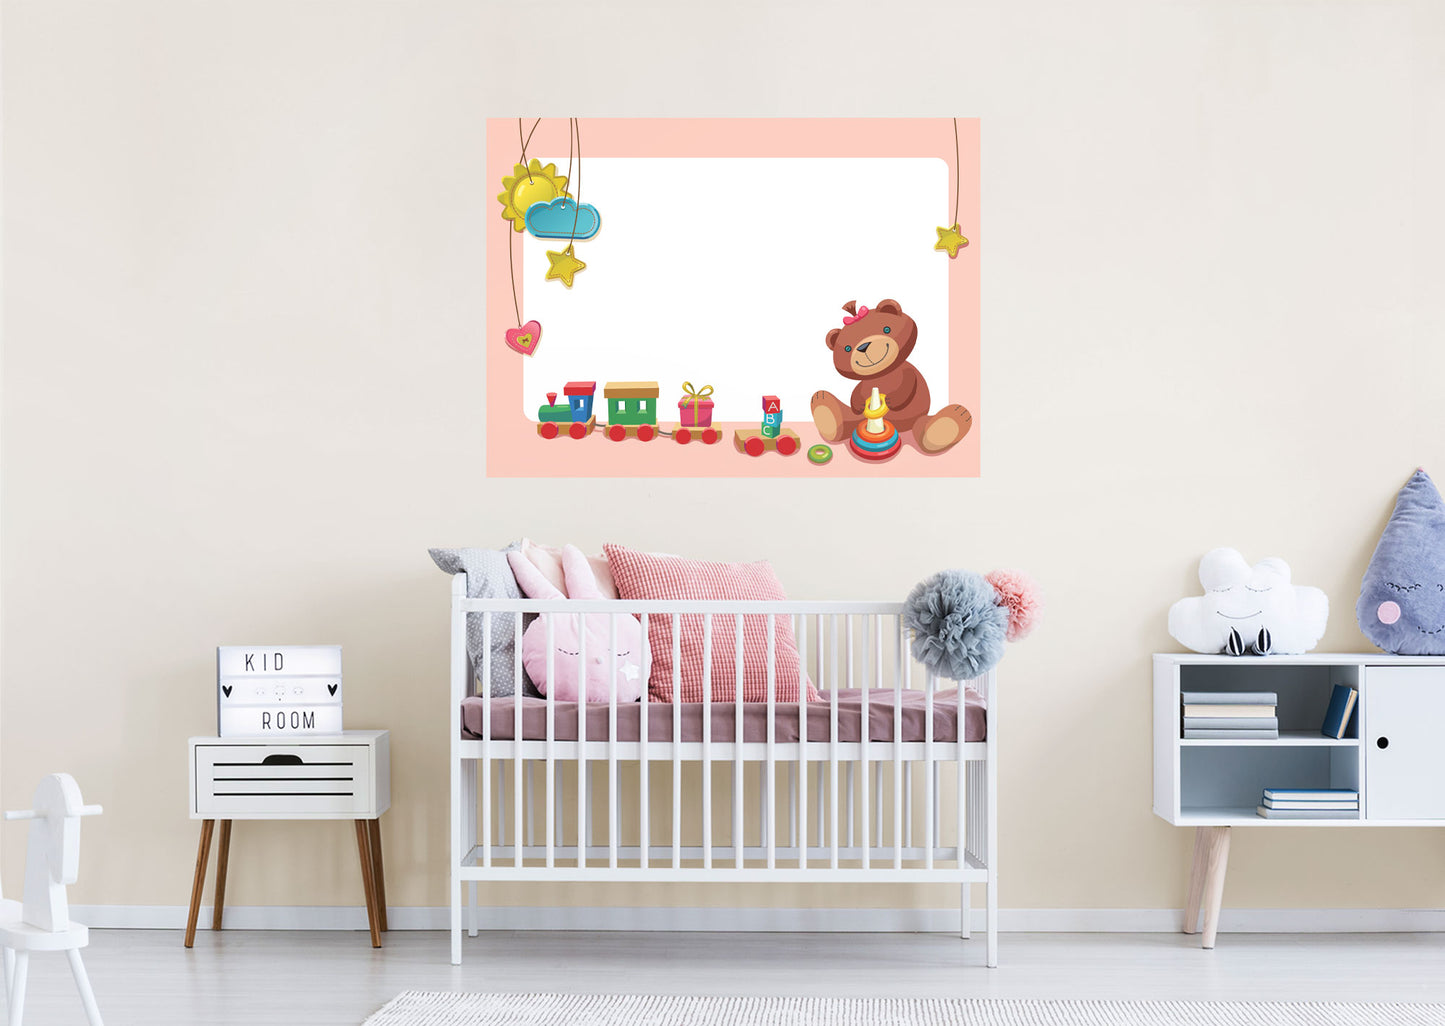 Nursery:  Pink Bear Dry Erase        -   Removable Wall   Adhesive Decal